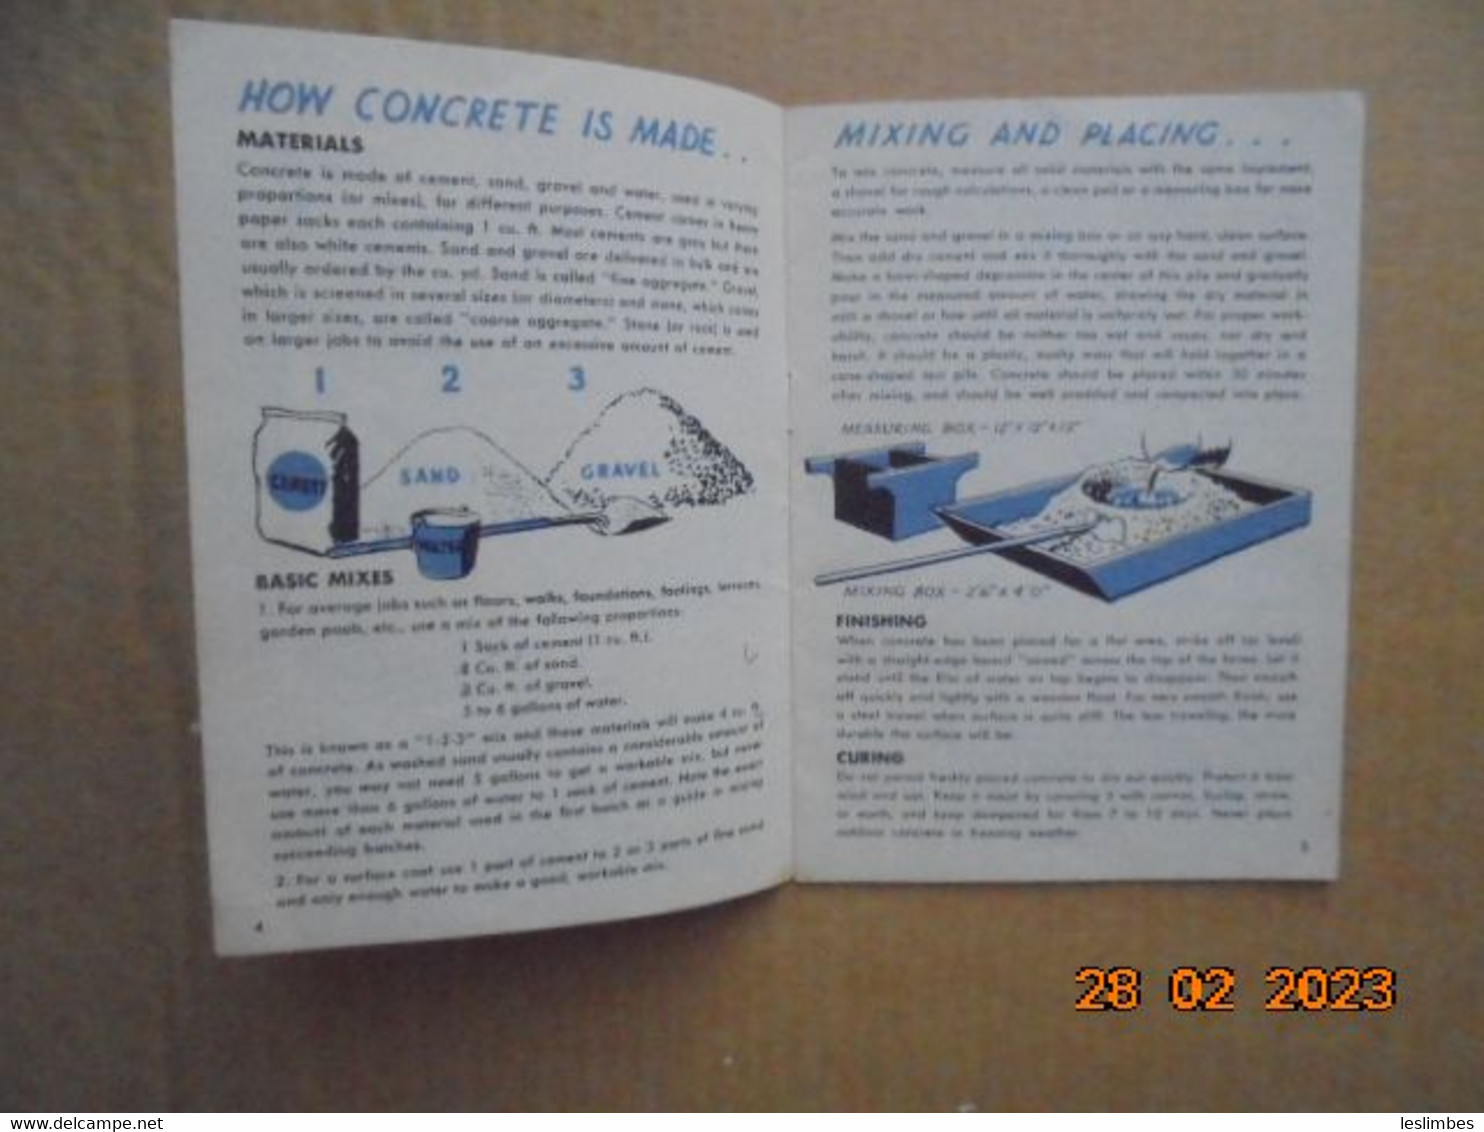 Concrete Ideas: How To Use Concrete Around The House By H. Wood. Mercer Publishing Co. 1953 - Practical Skills